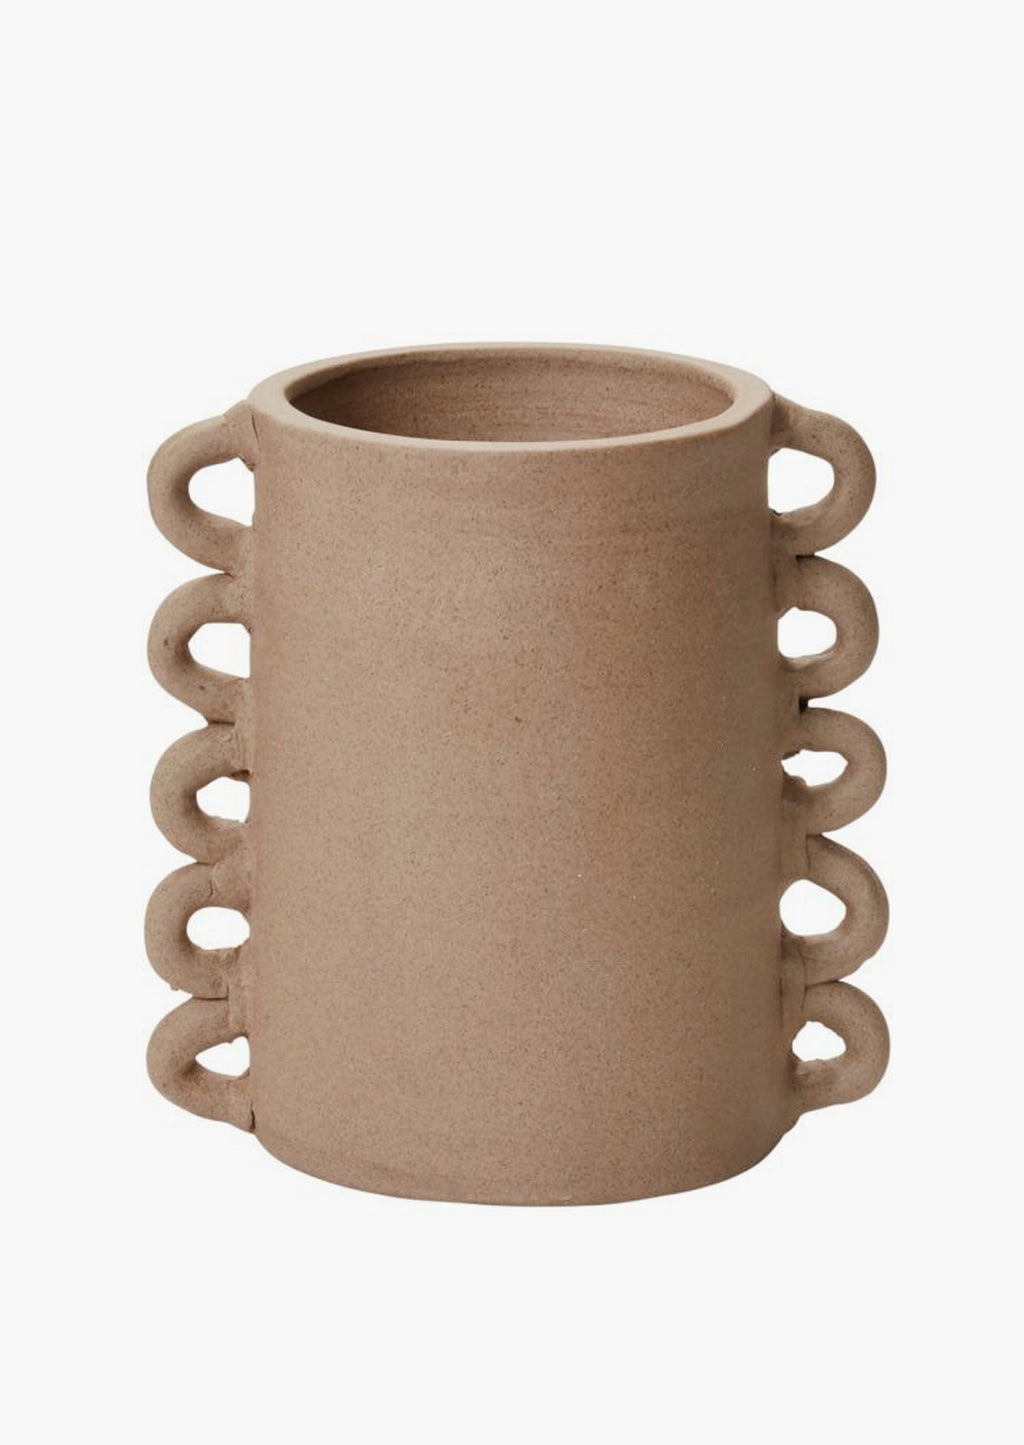 2: A raw sand clay vase with decorative loops all the way down both sizes.